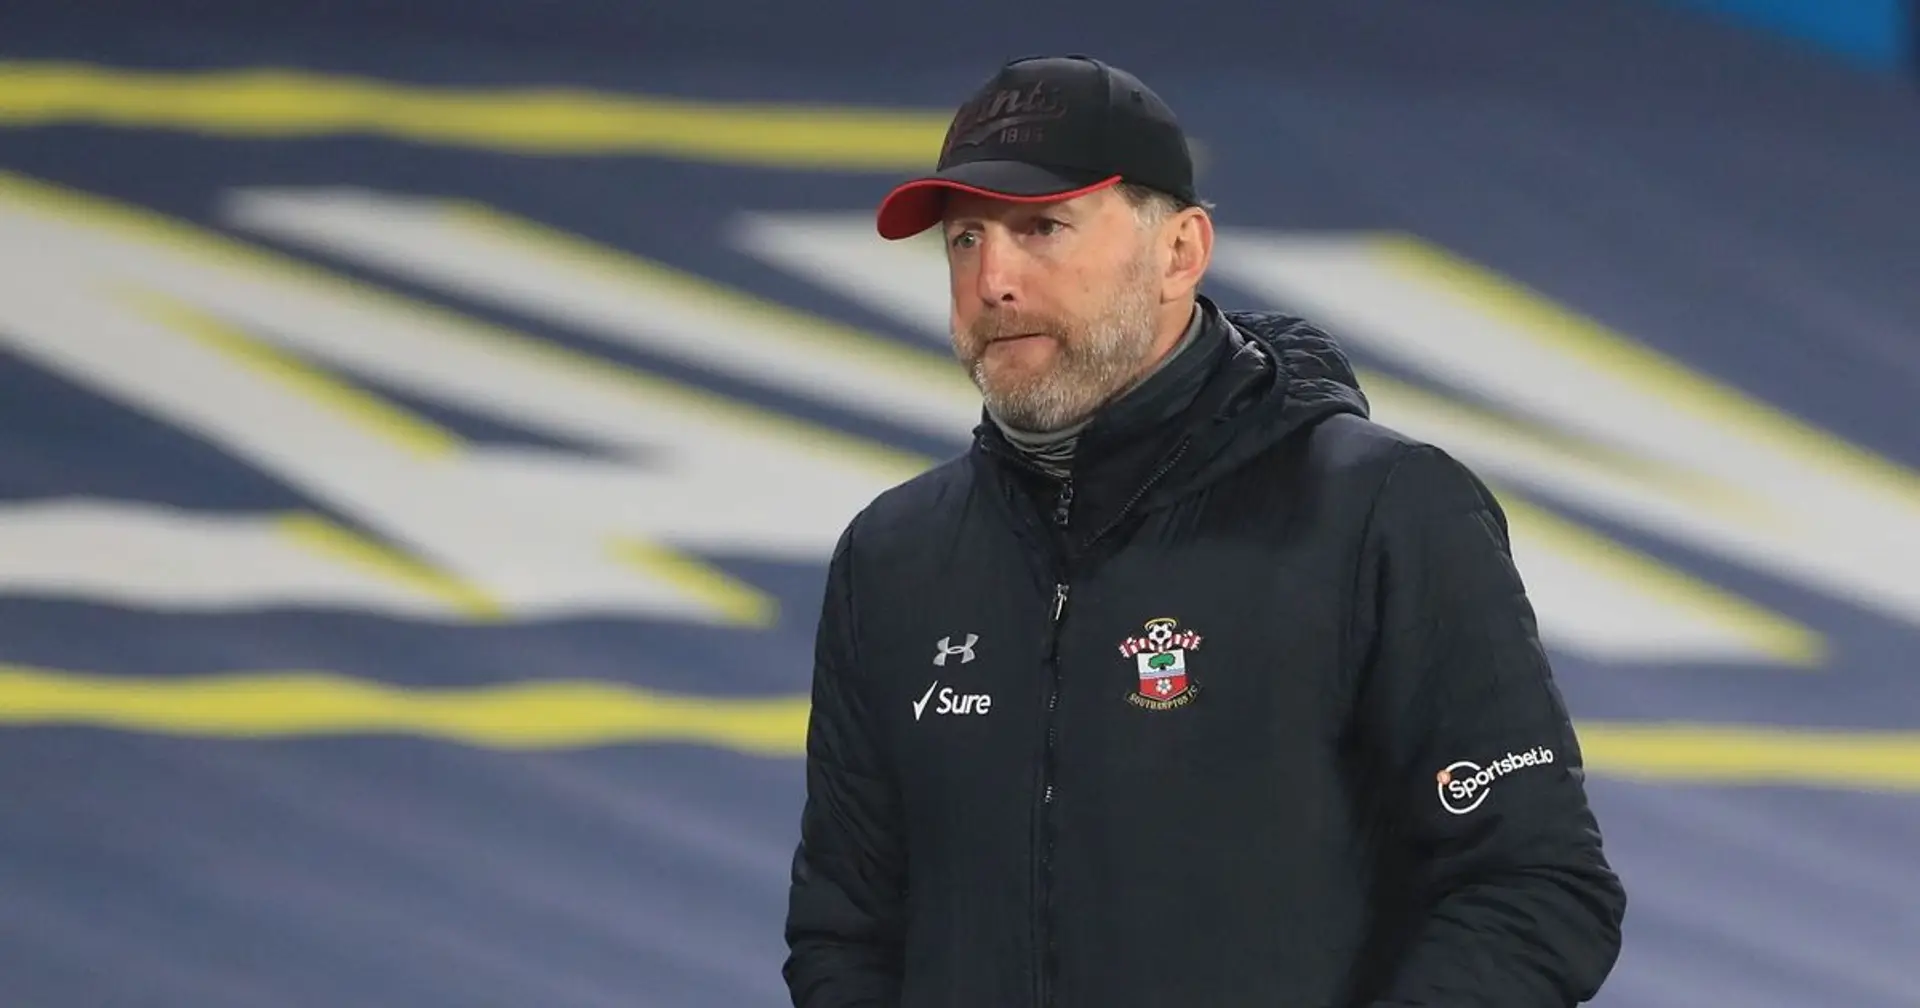 'I see a war coming up': Saints manager Hasenhuttl hits out at Premier League's elite over Super League project